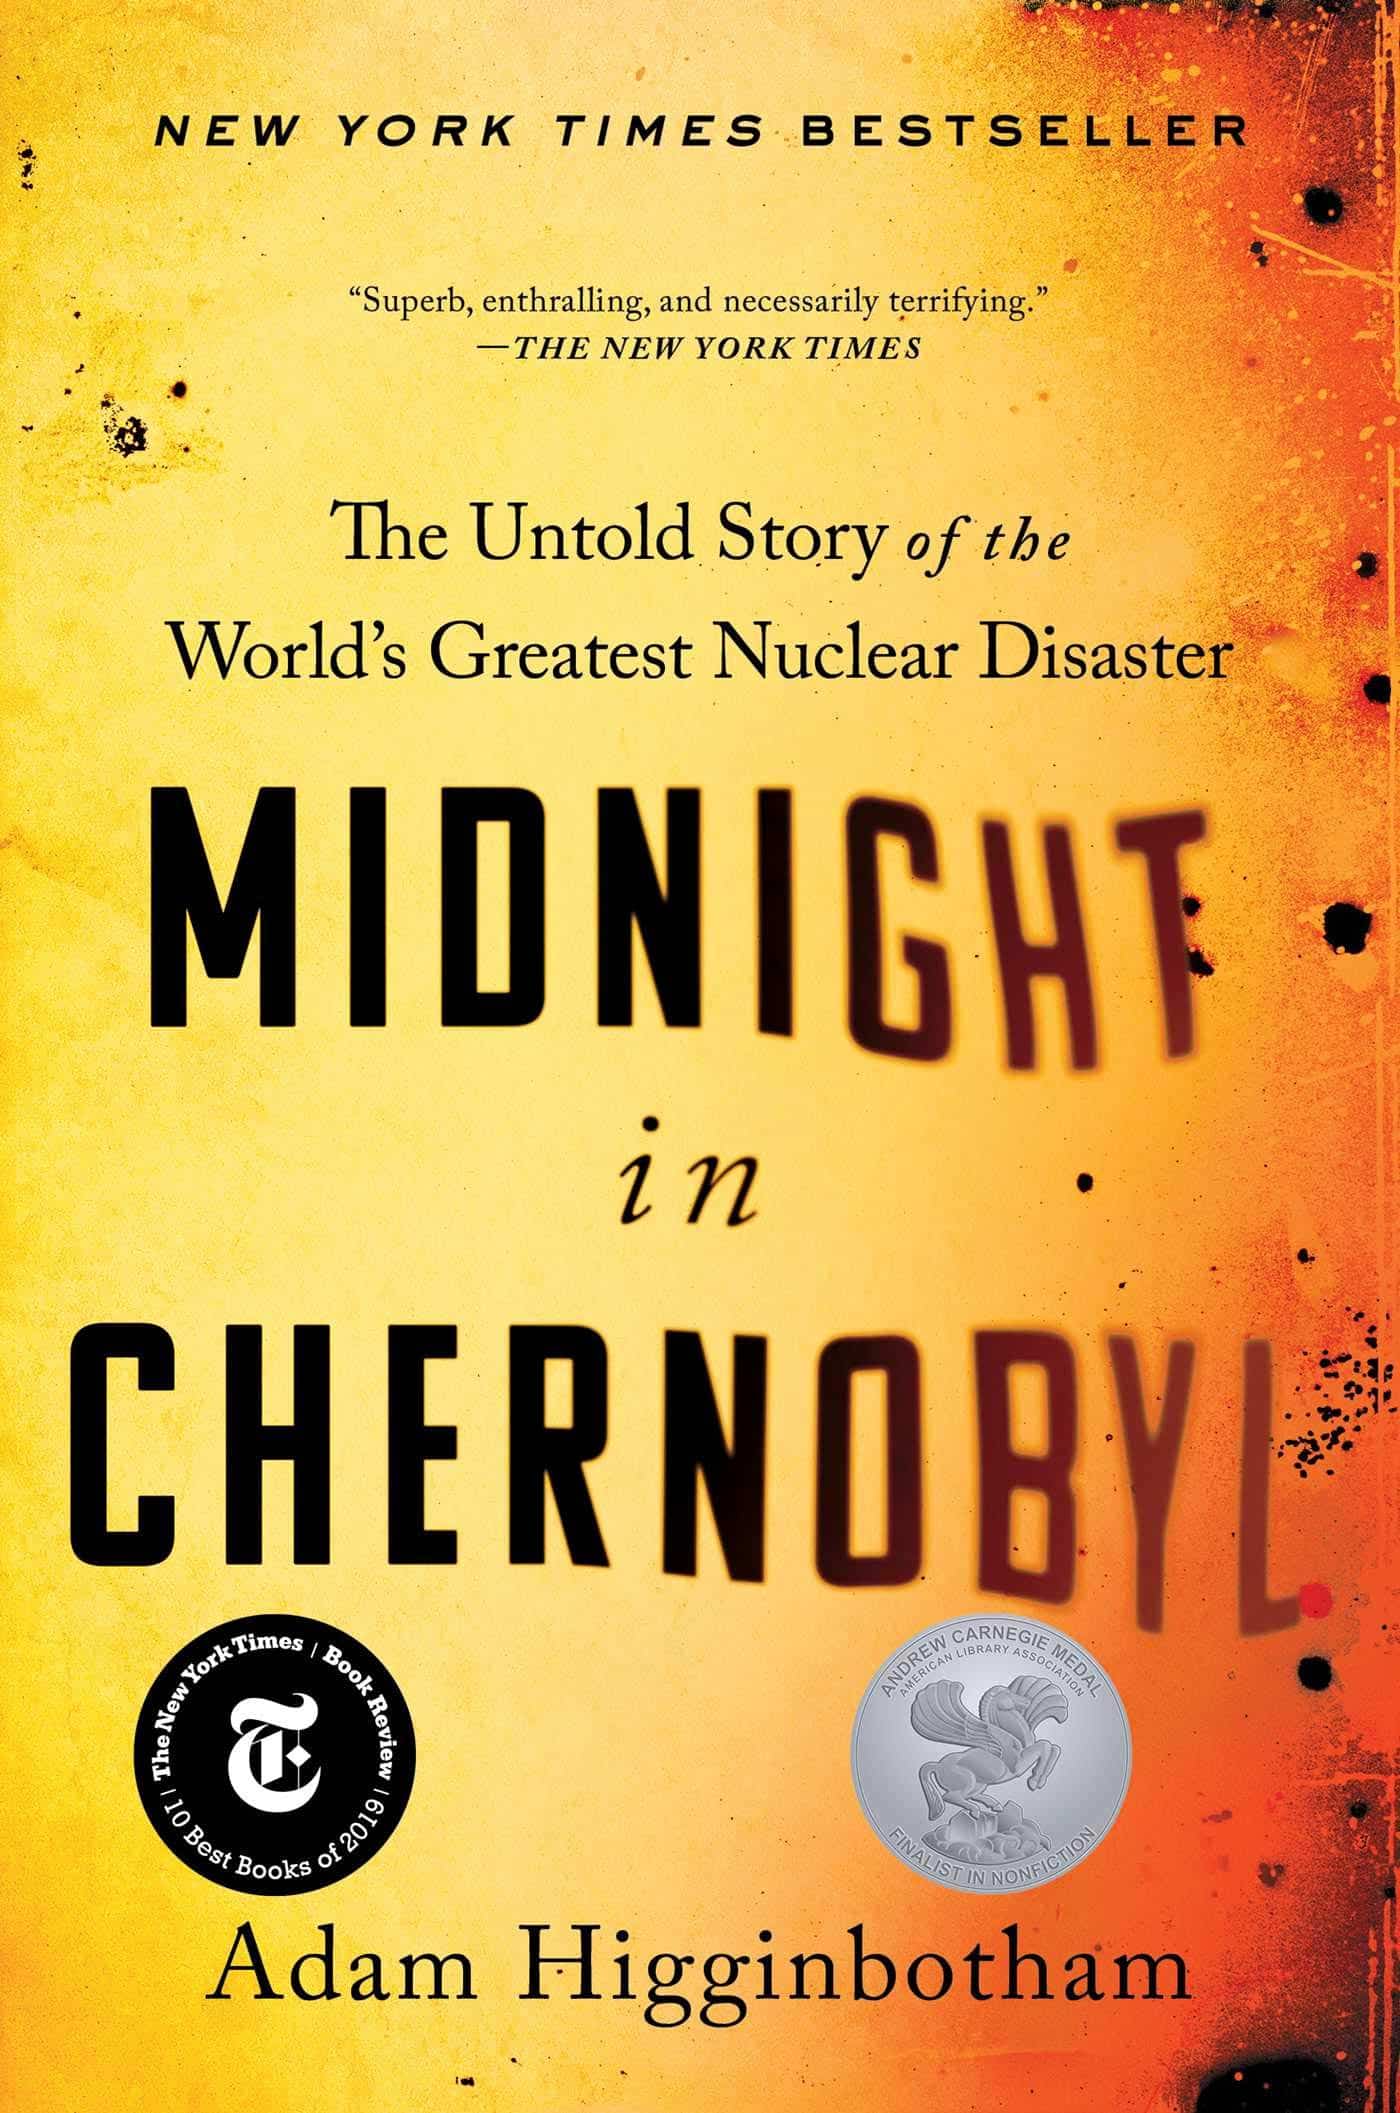 The cover of Midnight in Chernobyl